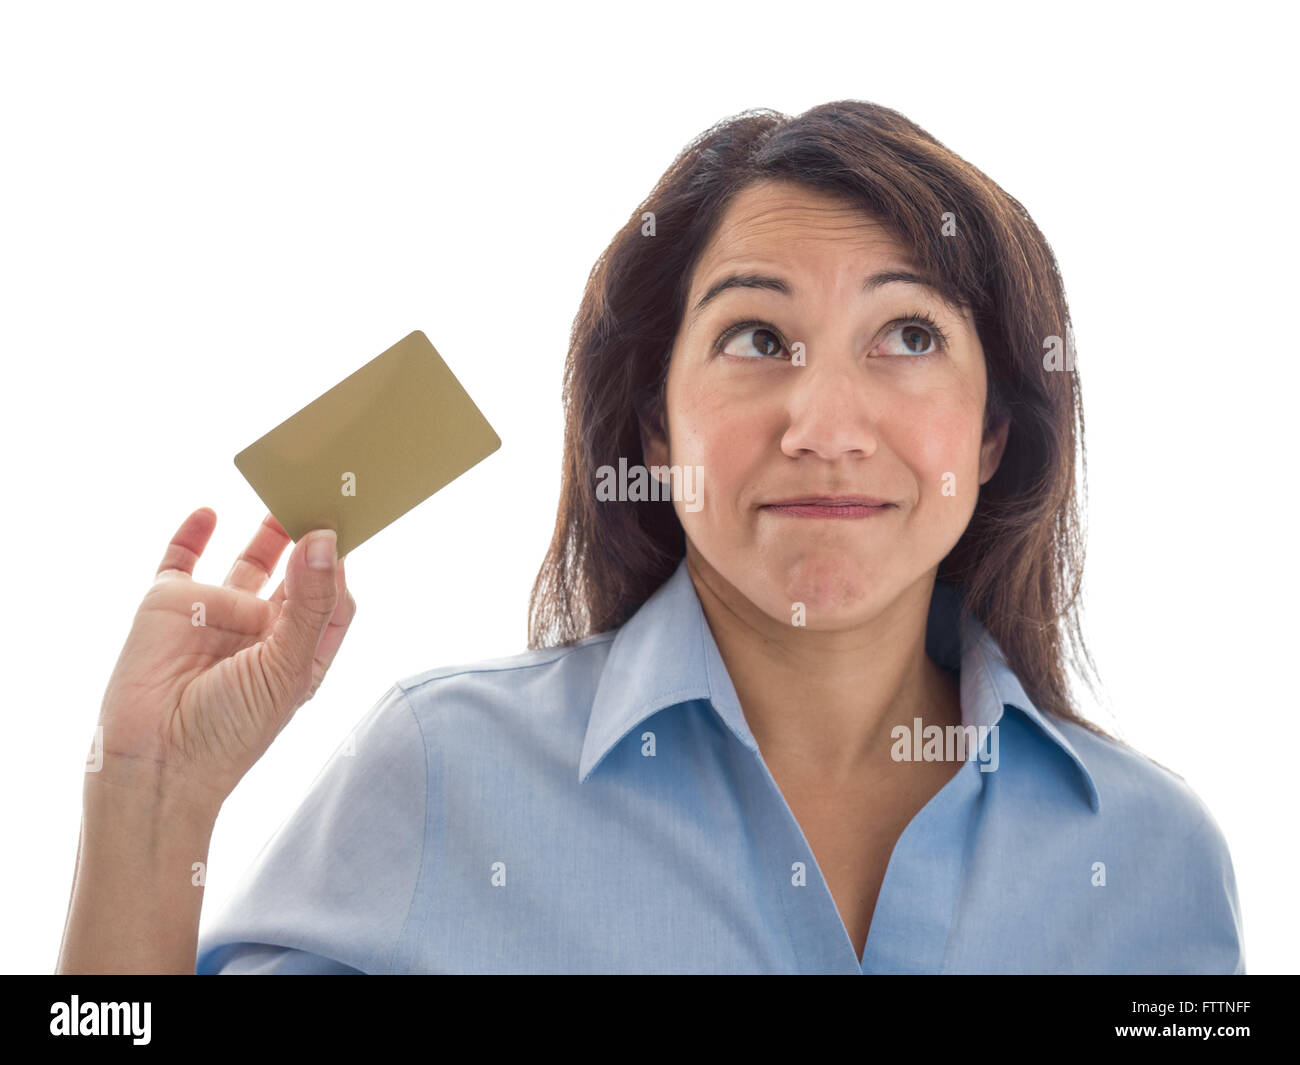 A young mixed race woman is considering what to do with a credit card or gift card. Stock Photo